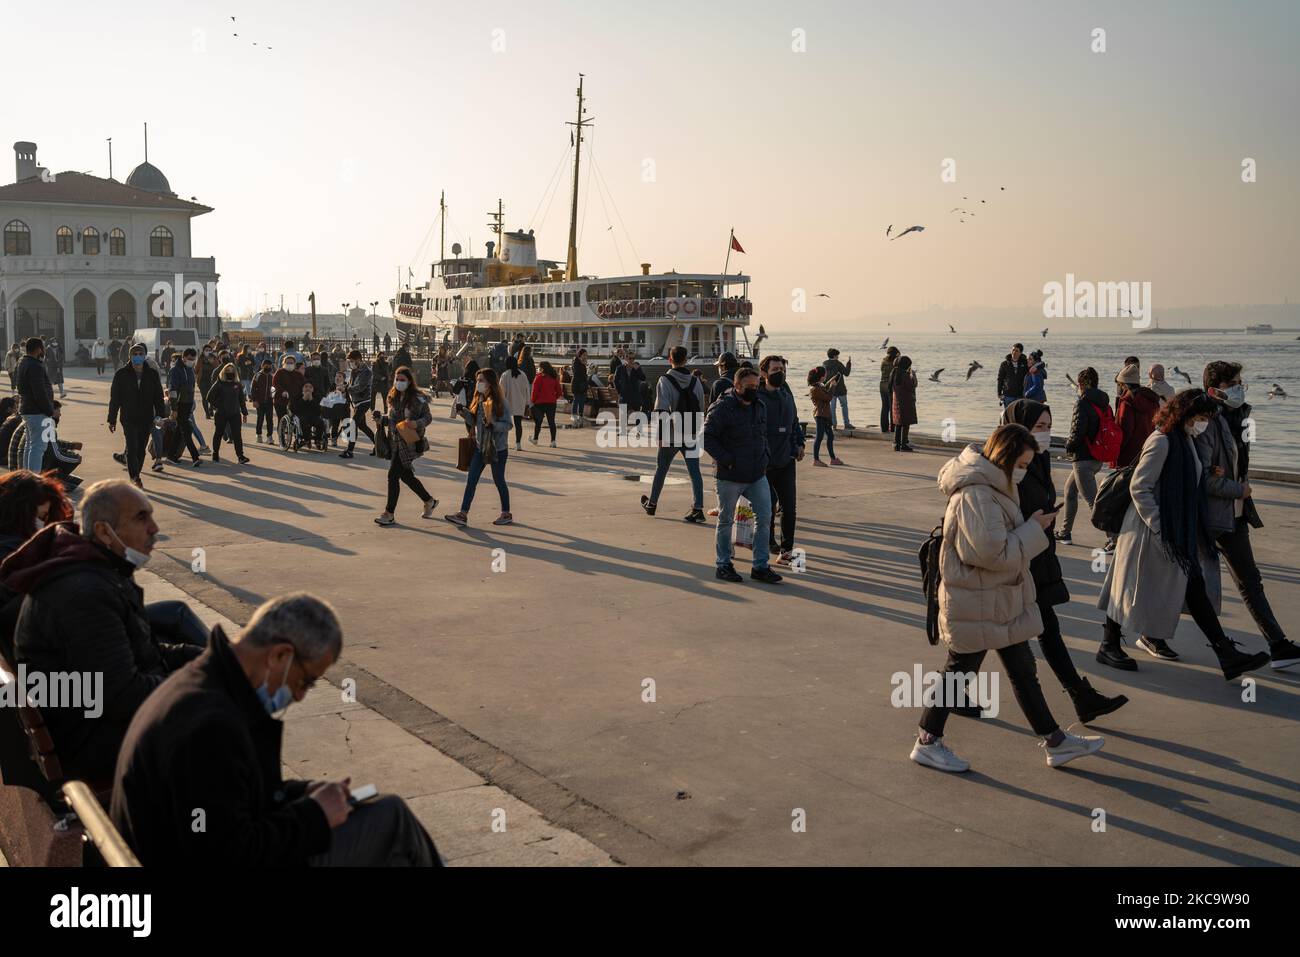 Daily life in Istanbul, Turkey seen on February 23, 2021. Turkey will start to gradually normalize from coronavirus restrictions as of March 1, said Health Minister Fahrettin Koca. (Photo by Erhan Demirtas/NurPhoto) Stock Photo